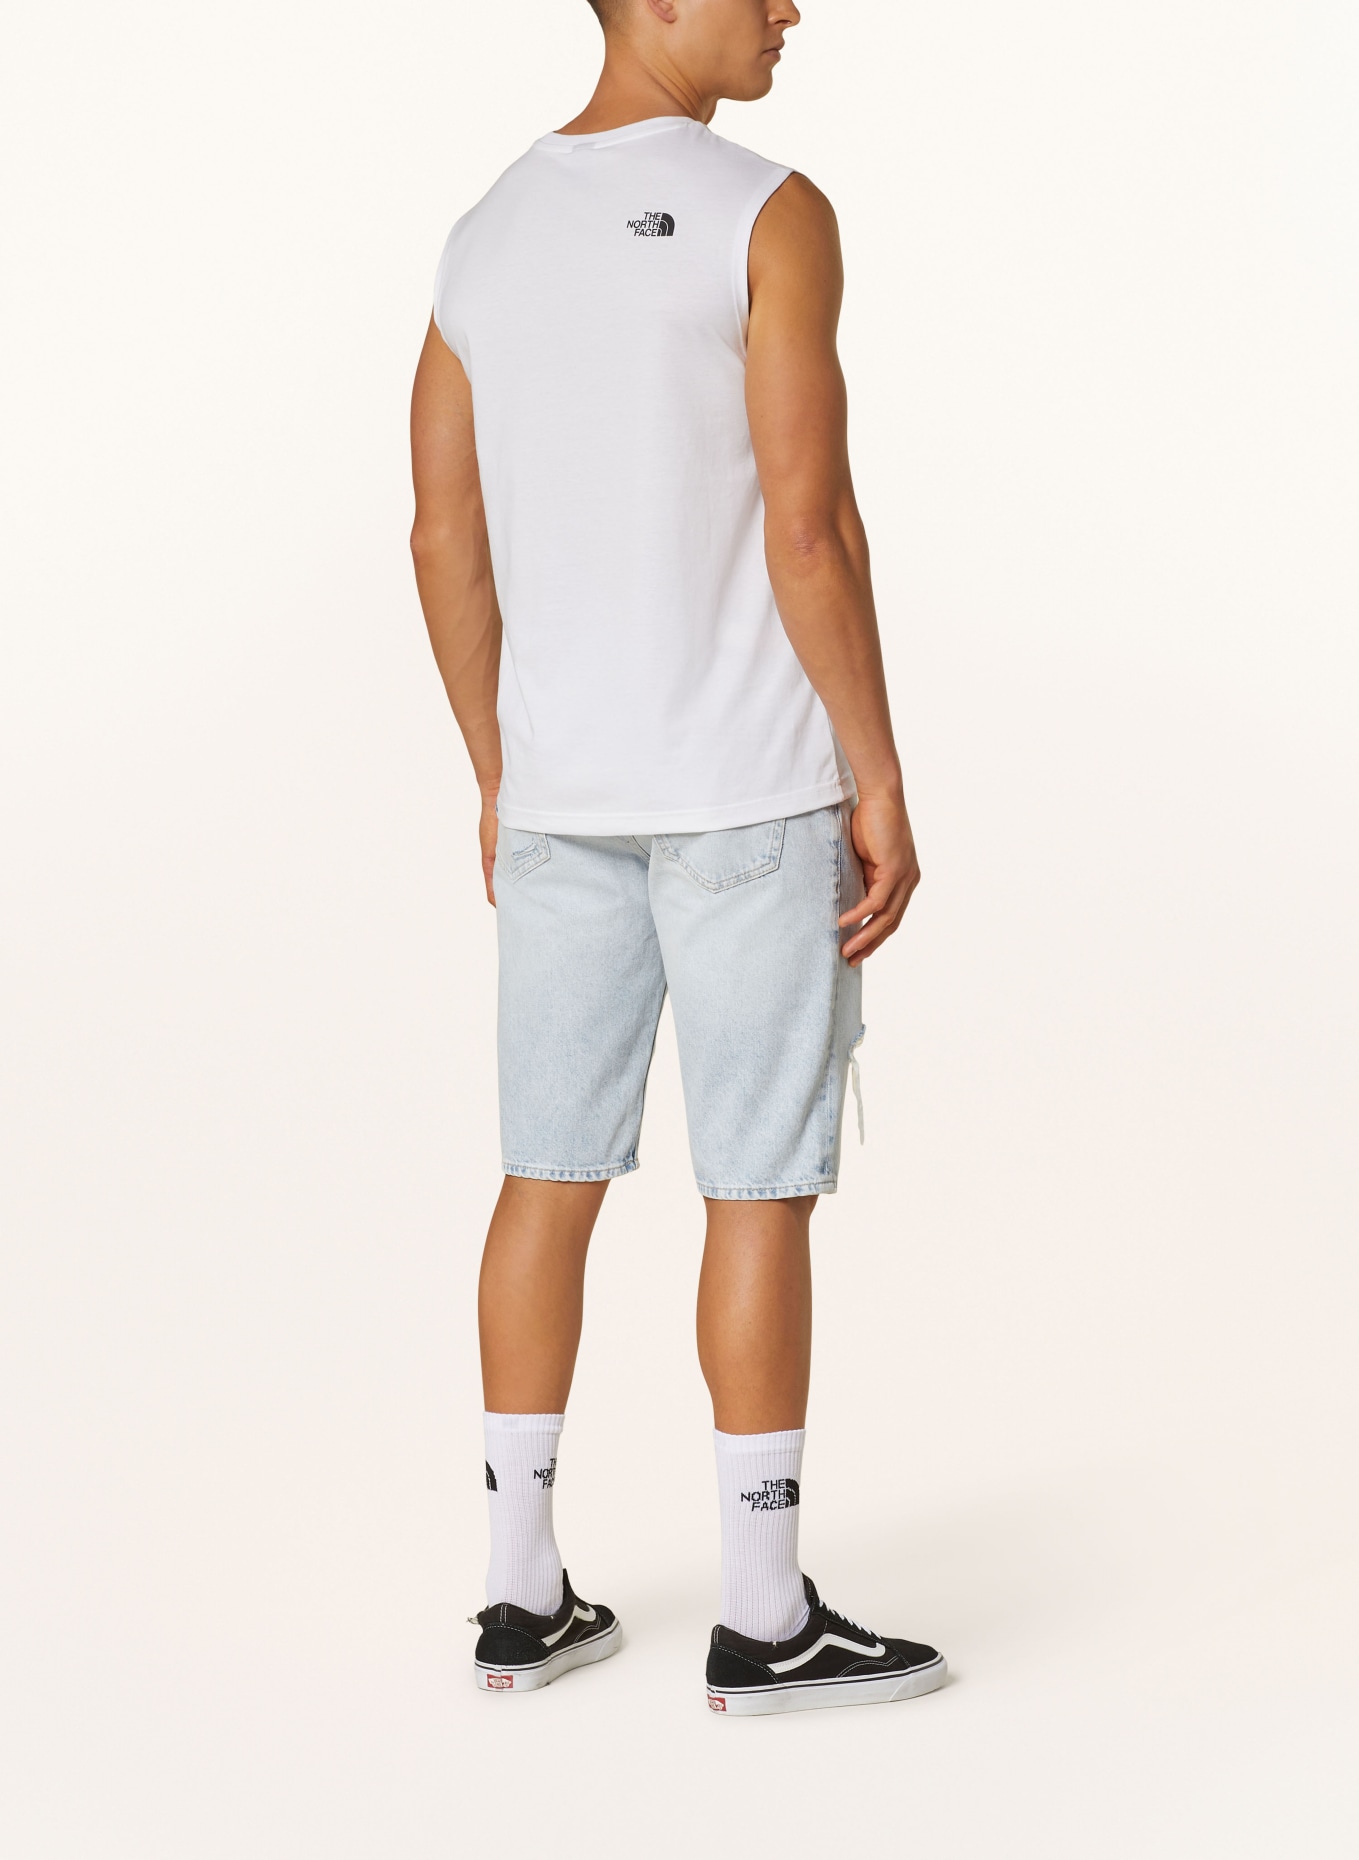 THE NORTH FACE Oversized-Tanktop SIMPLE DOME, Farbe: WEISS (Bild 3)